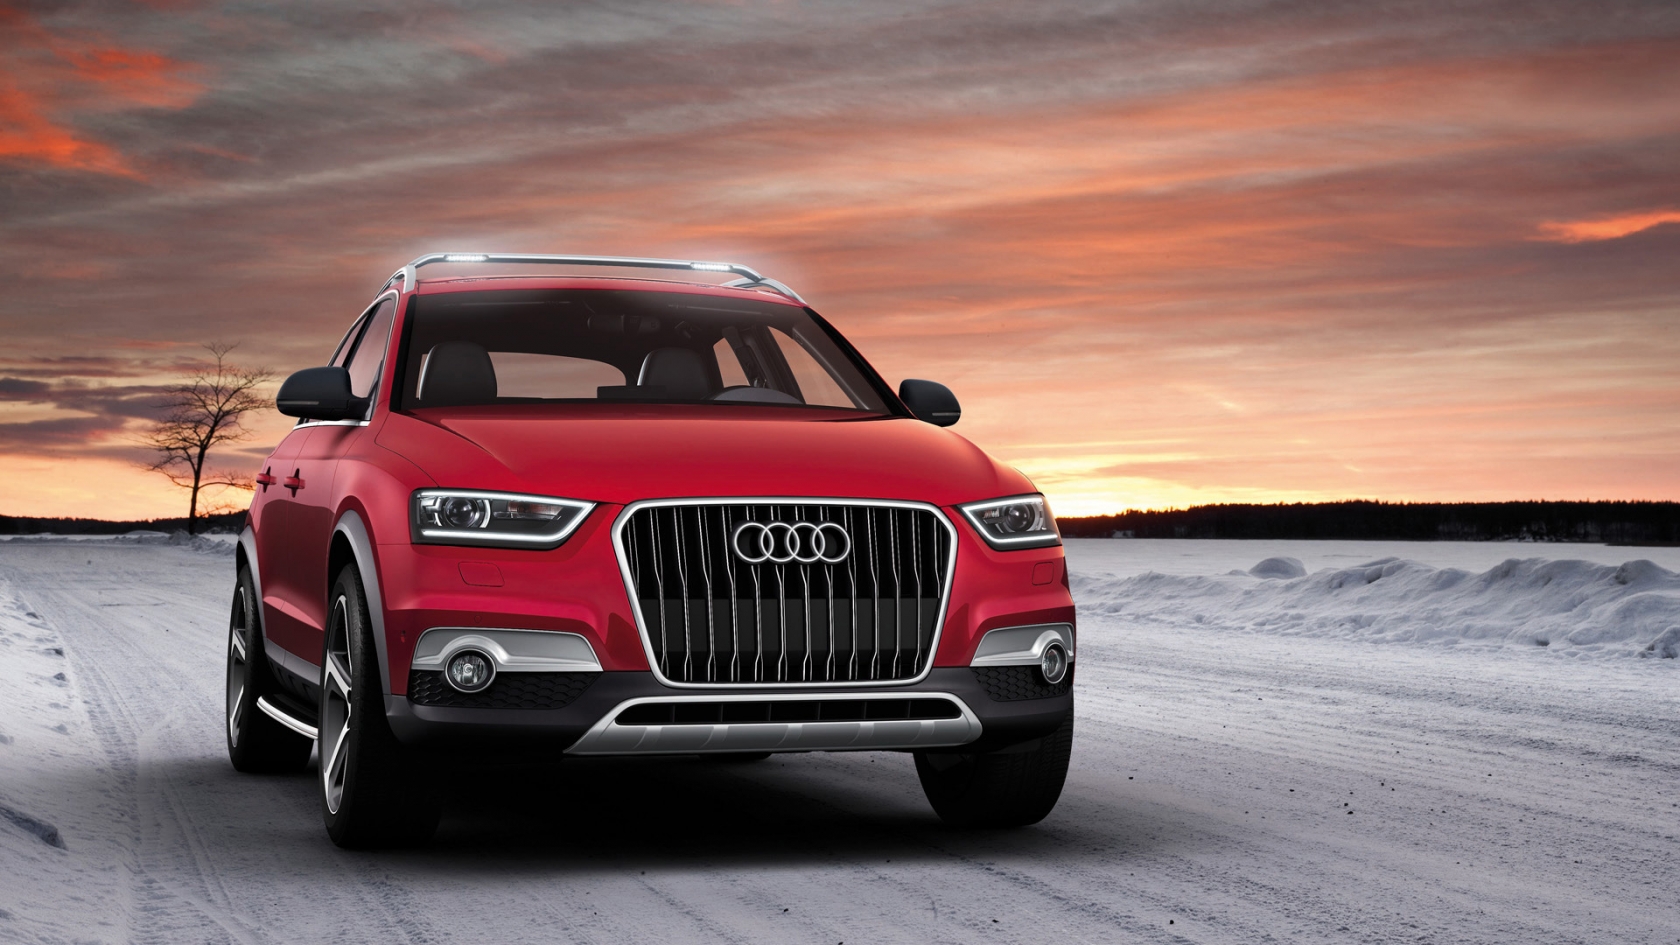 2012 Audi Q3 Vail Front for 1680 x 945 HDTV resolution